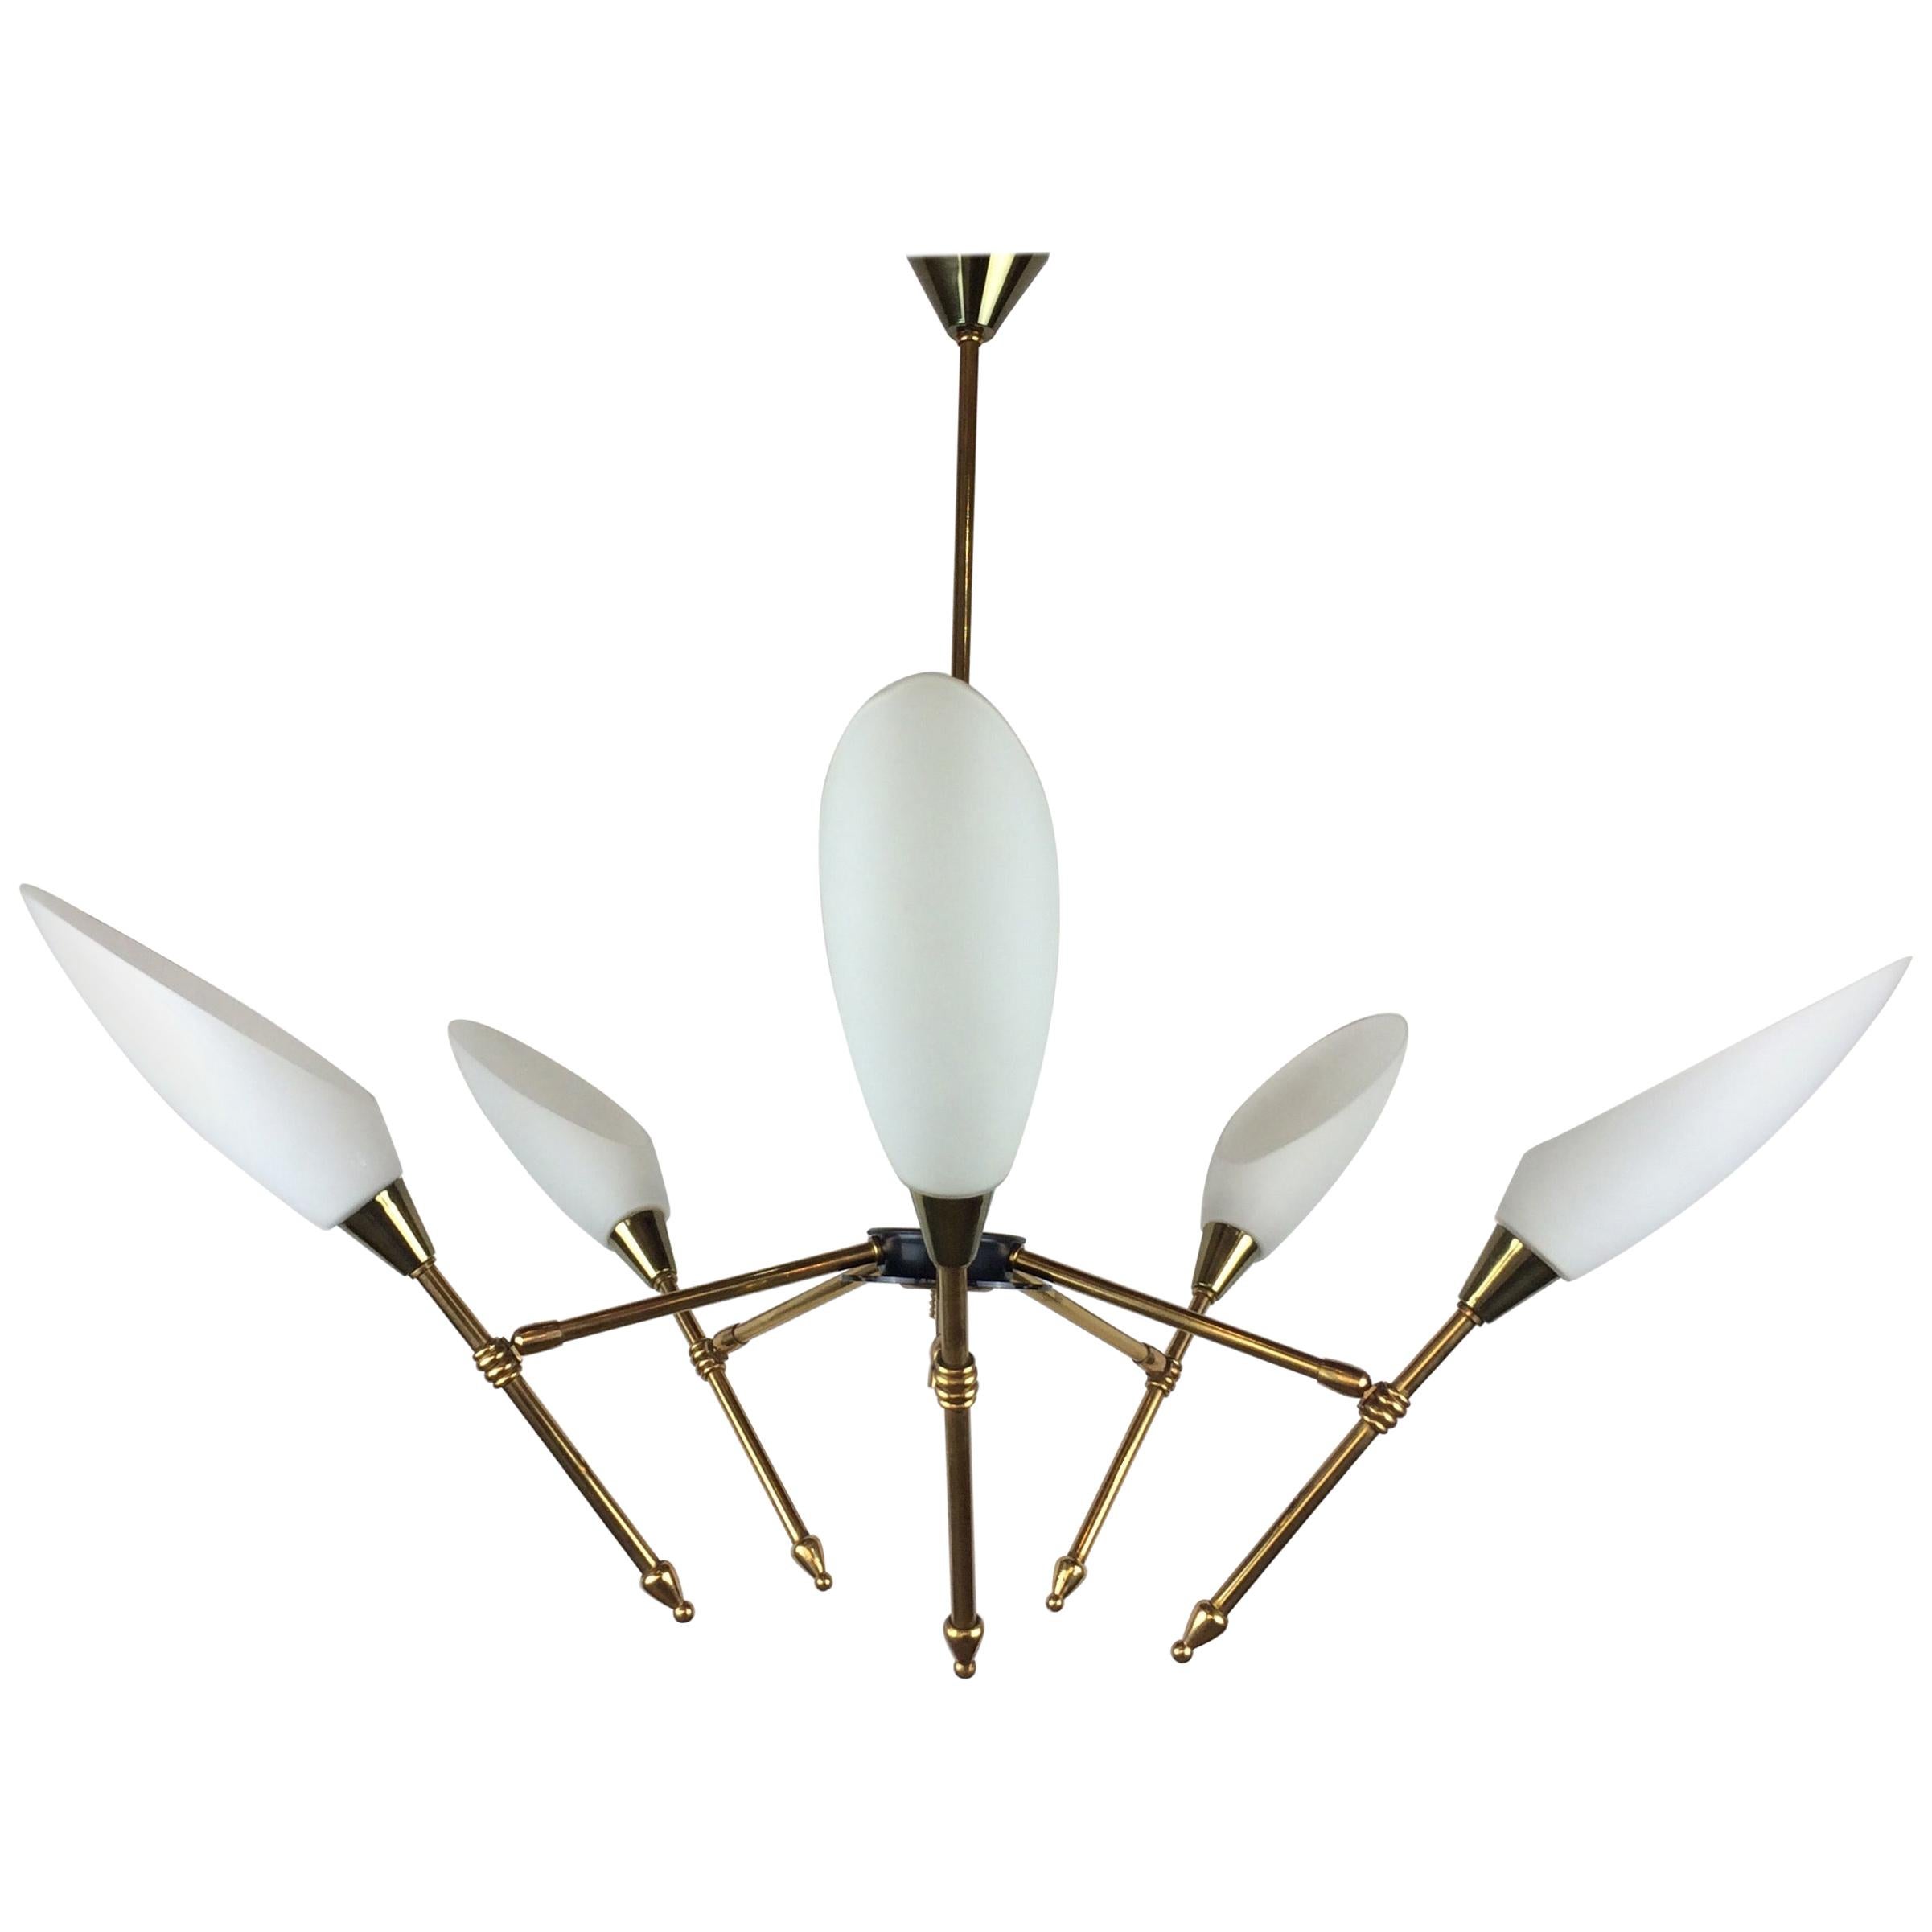 Iconic, rare, unique and with remarkable dimensions, Maison Arlus high design chandelier produced in France in the 1950s-1960s.

The peculiarity that distinguishes this chandelier is its innovative form of that period, the structure of directional,